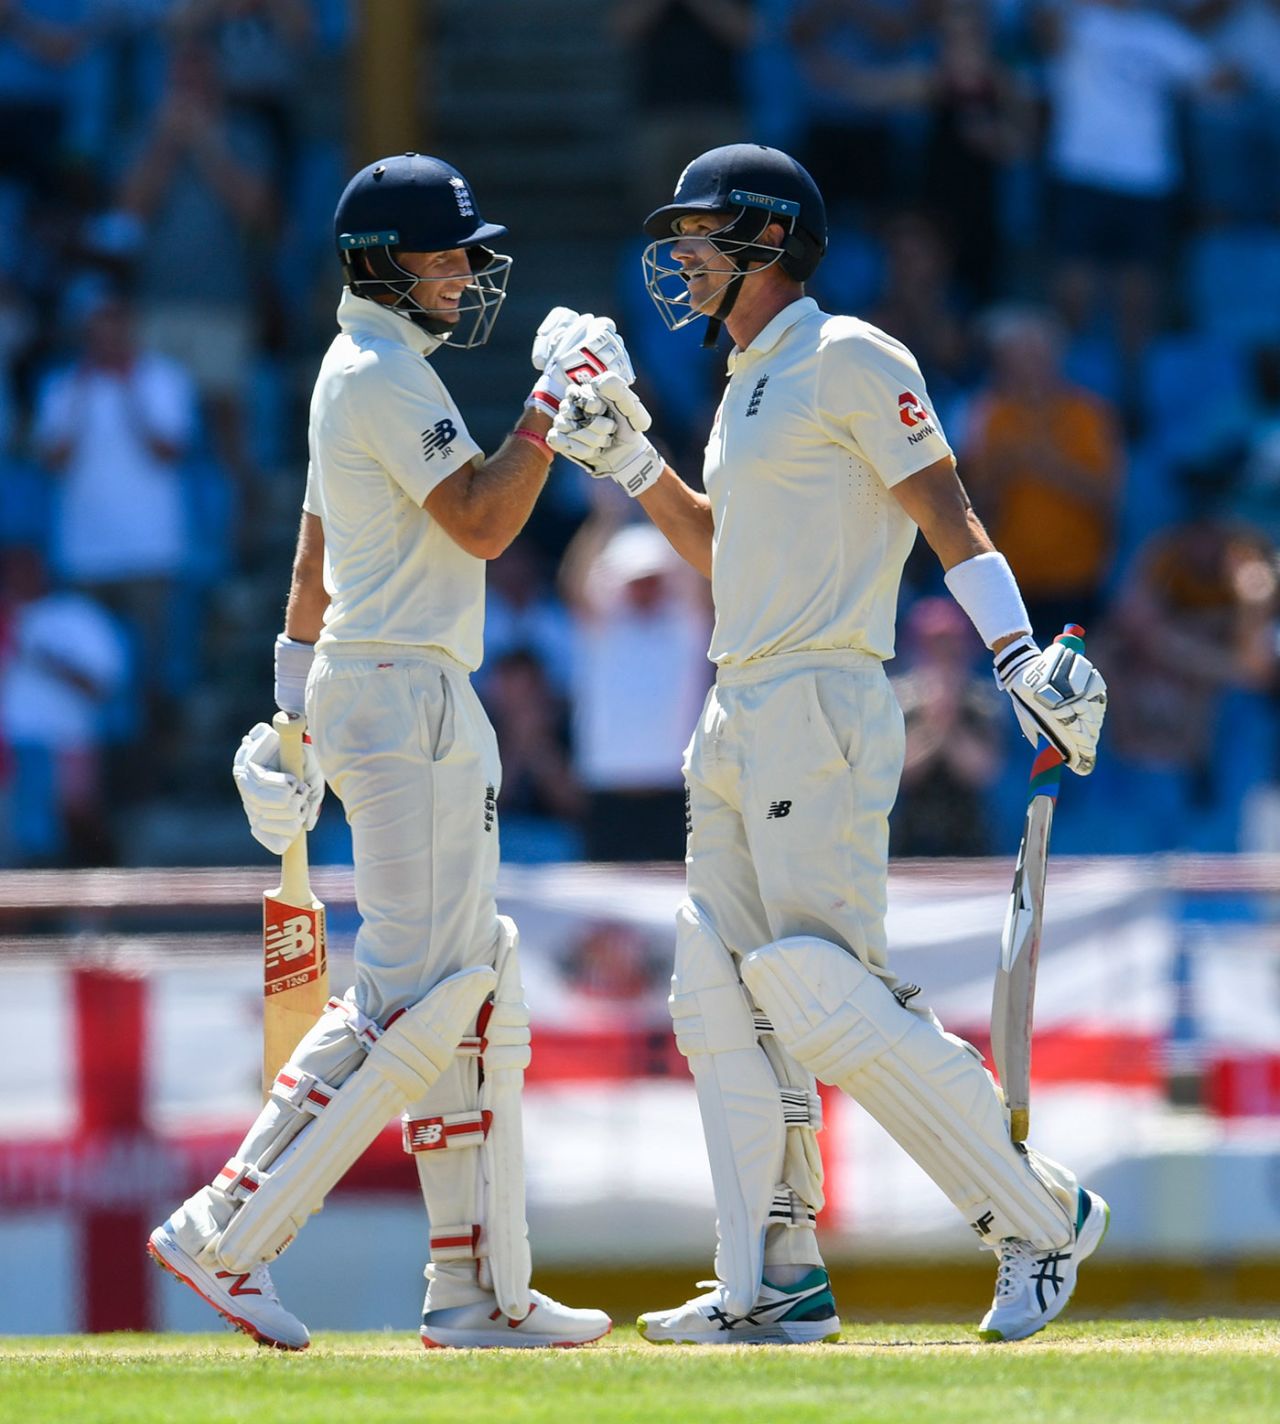 Joe Root congratulates Joe Denly on his maiden fifty, West Indies v England, 3rd Test, St Lucia, 3rd day, February 11, 2019